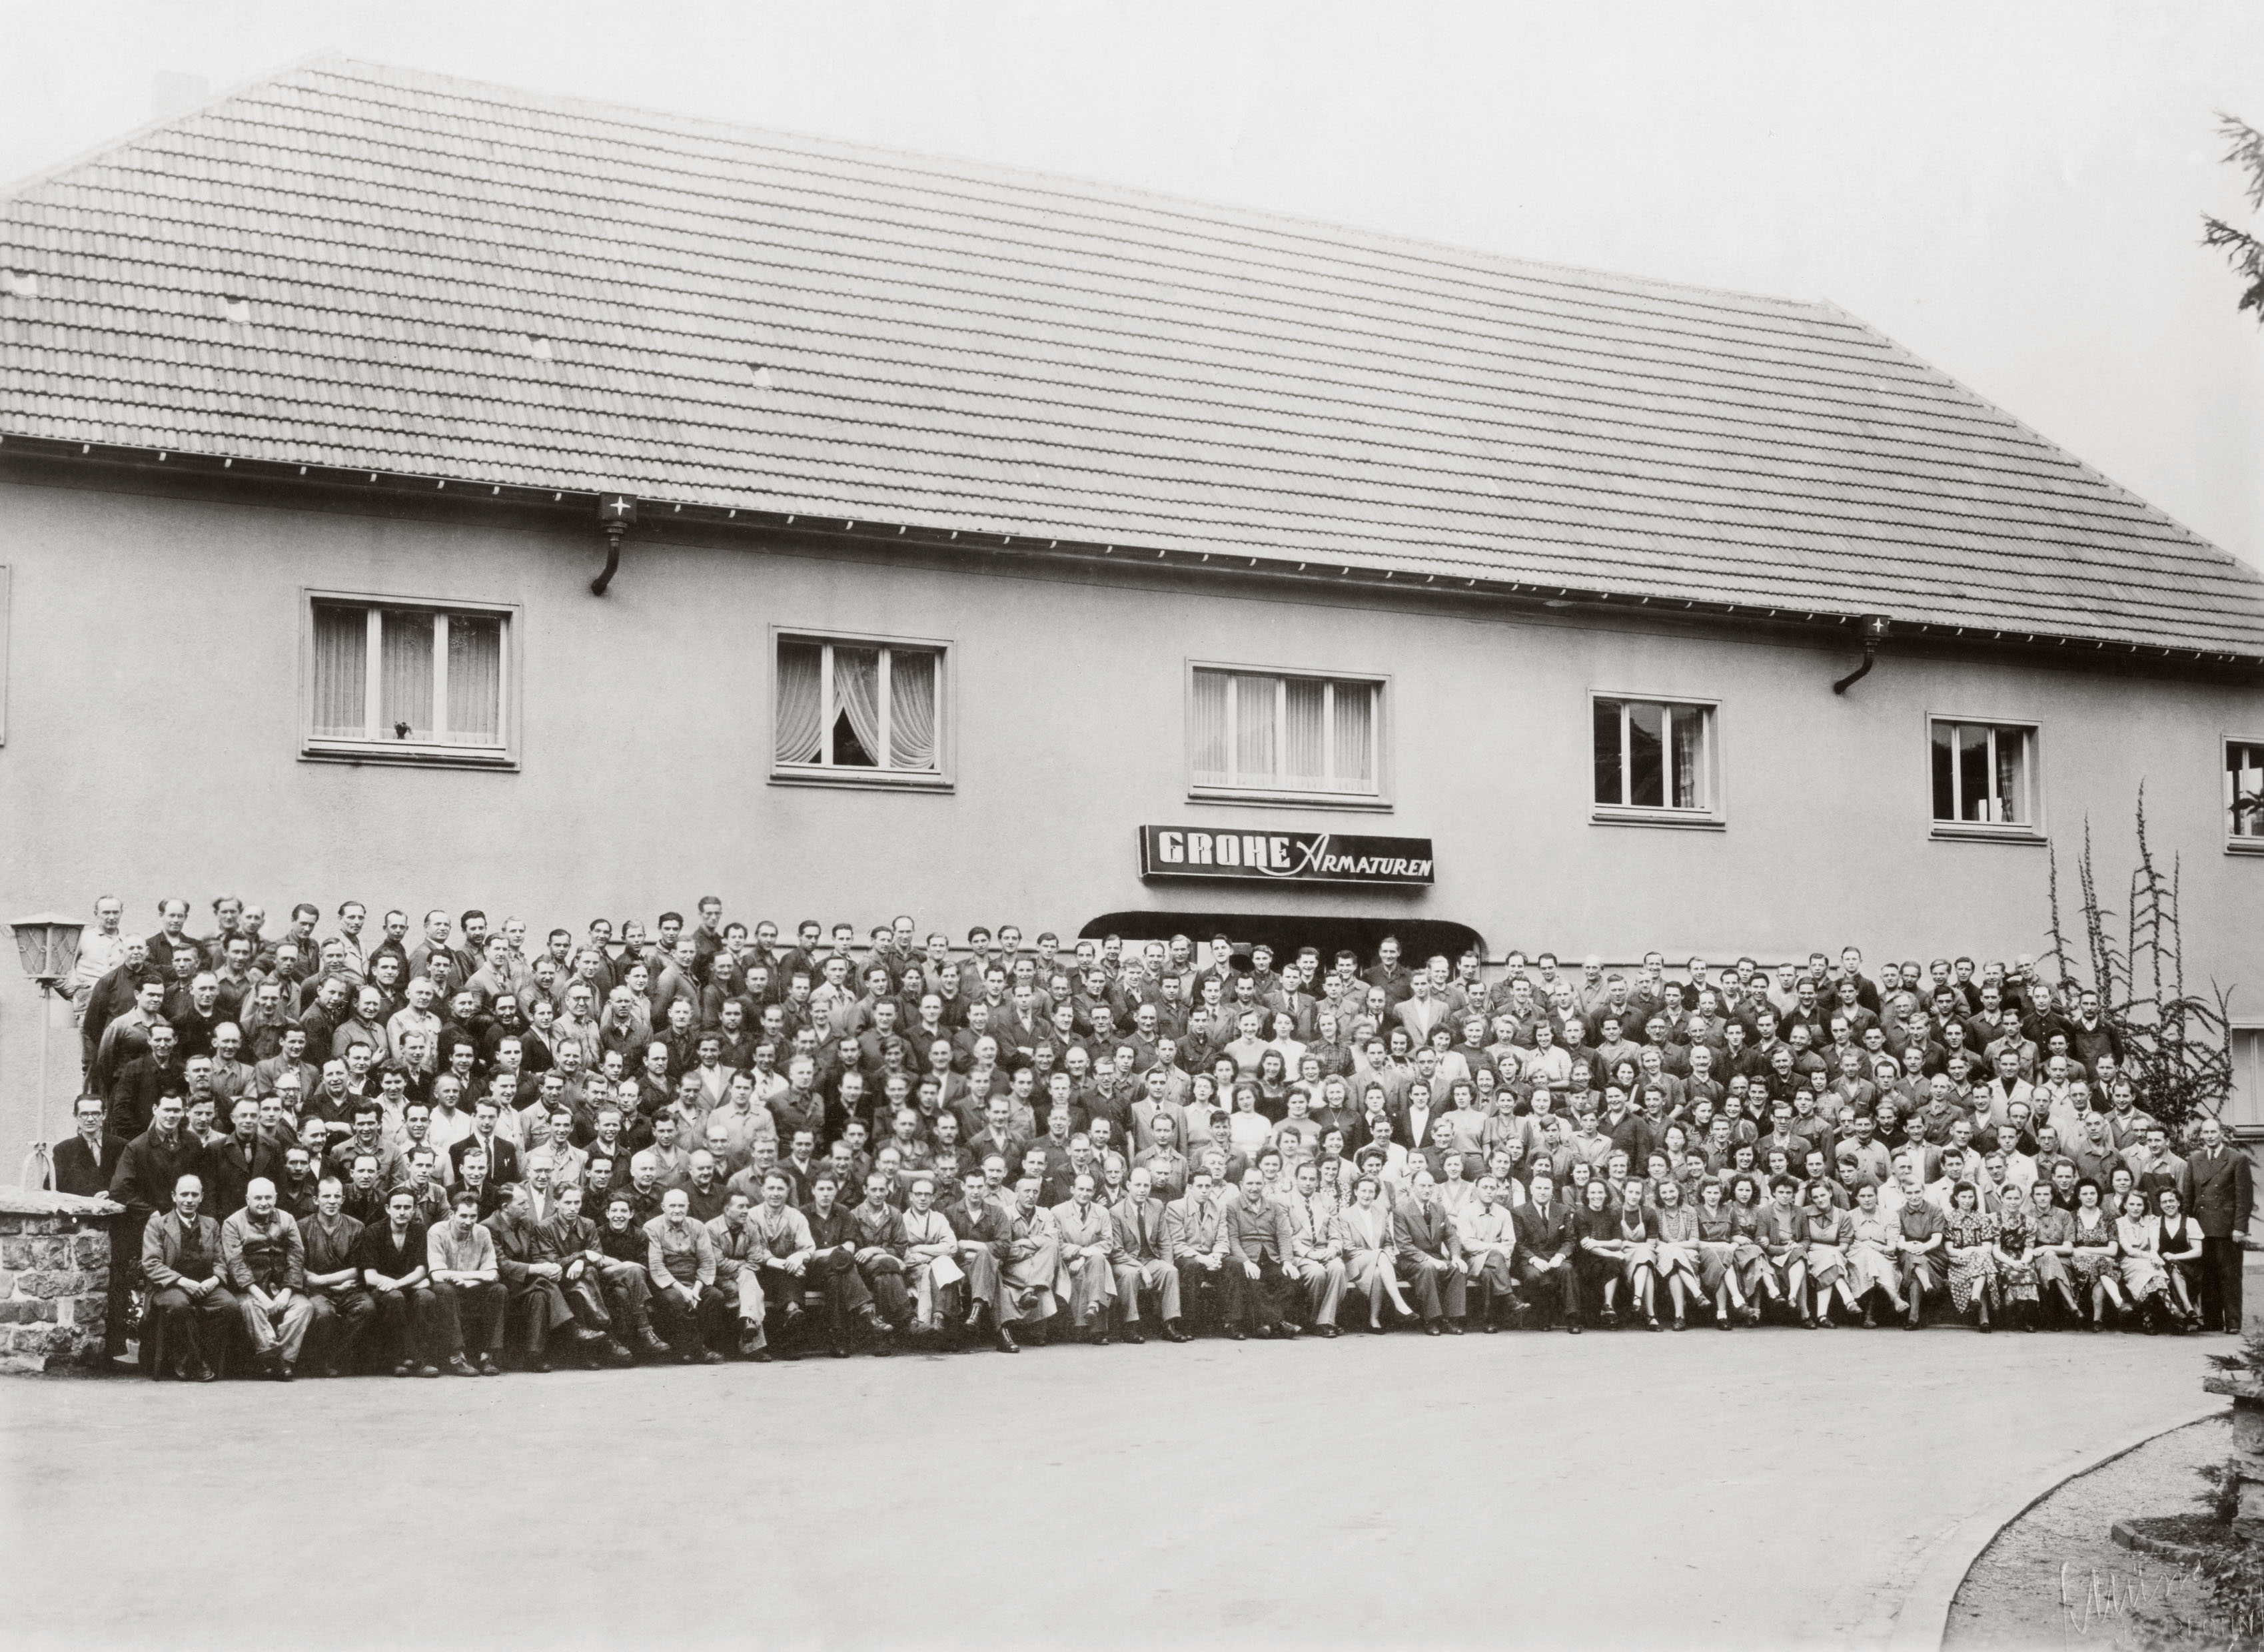 GROHE History_building GROHE Armaturen_with workforce